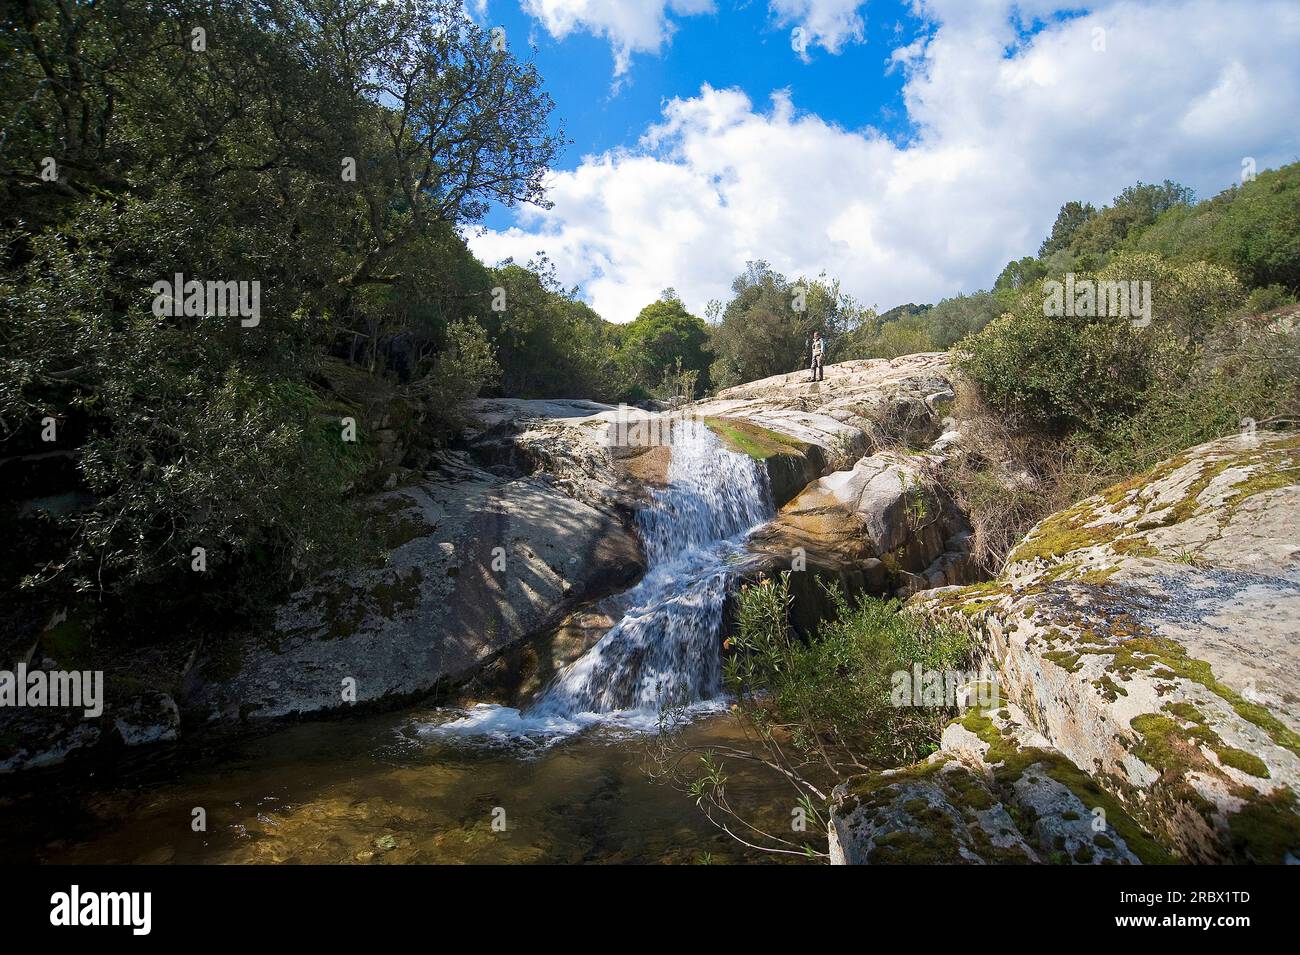 Oasis WWF Monte Arcosu. The Monte Arcosu - Piscinamanna forest complex is the largest Mediterranean Maquis forest in the entire Mediterranean basin. S Stock Photo